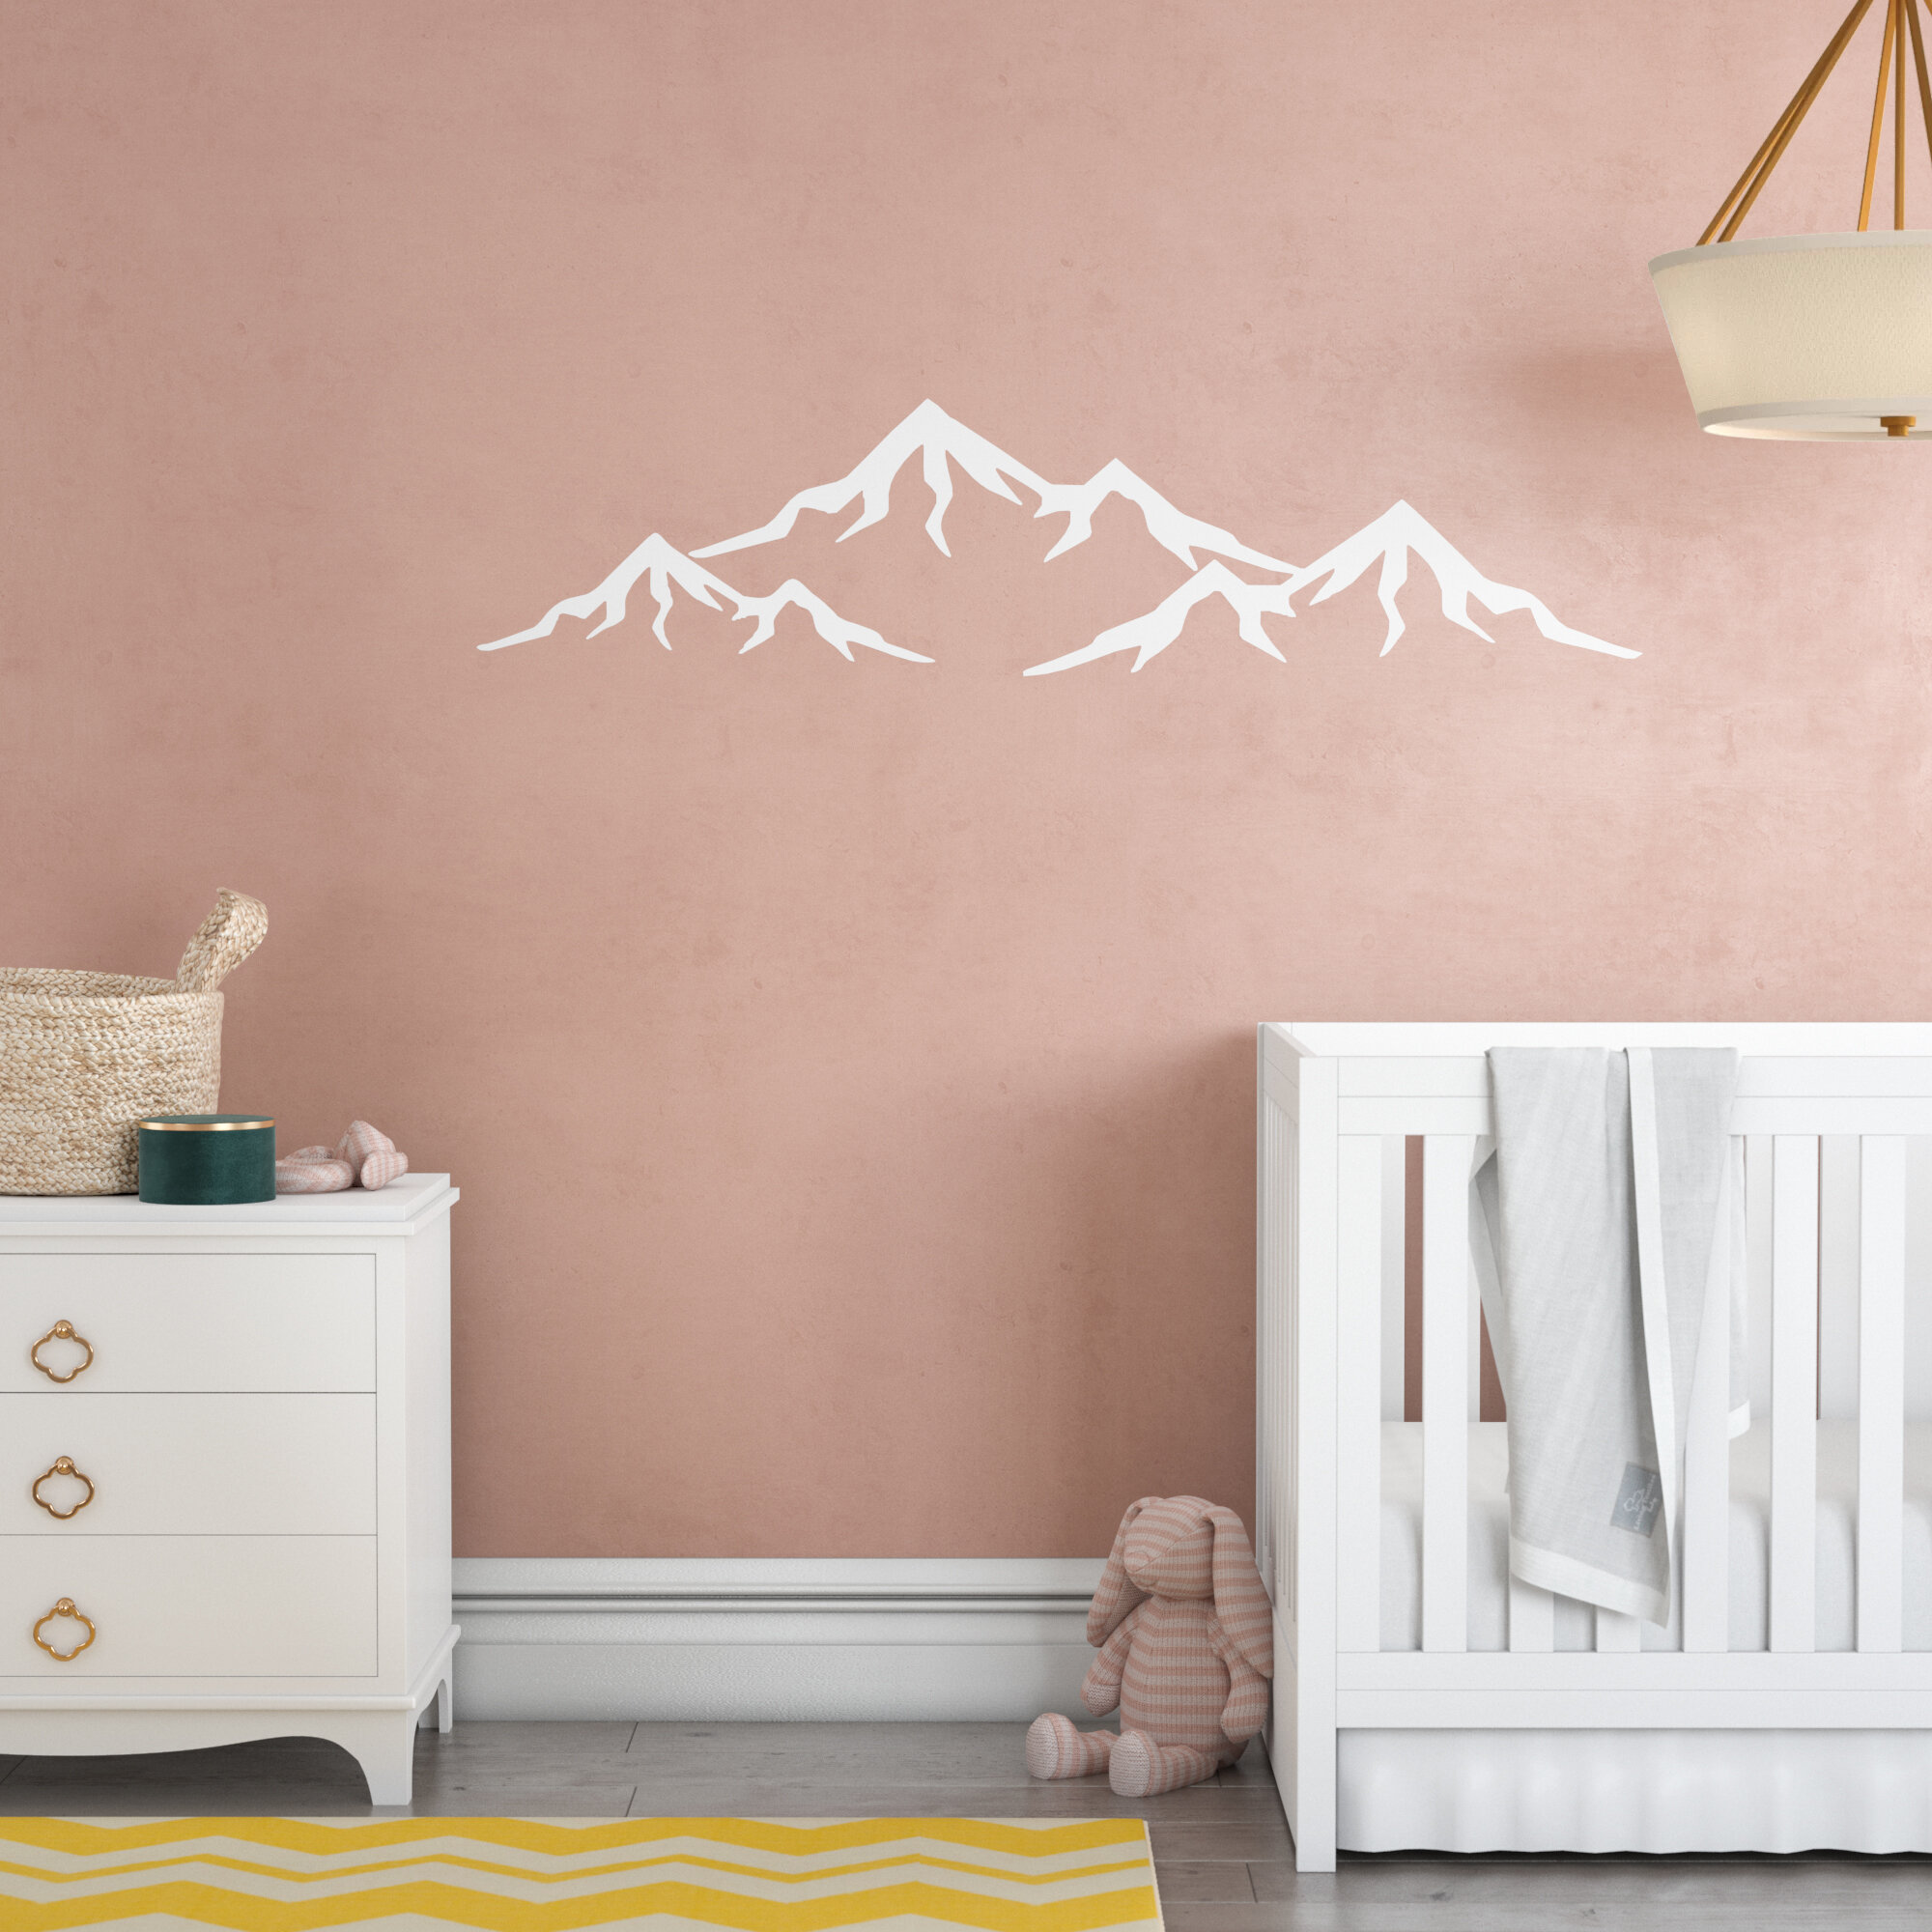 Kids Mountain Wall Decal WD481ph Kids Room Fabric Wall Decal Ecofriendly No Toxins No PVCs Decals